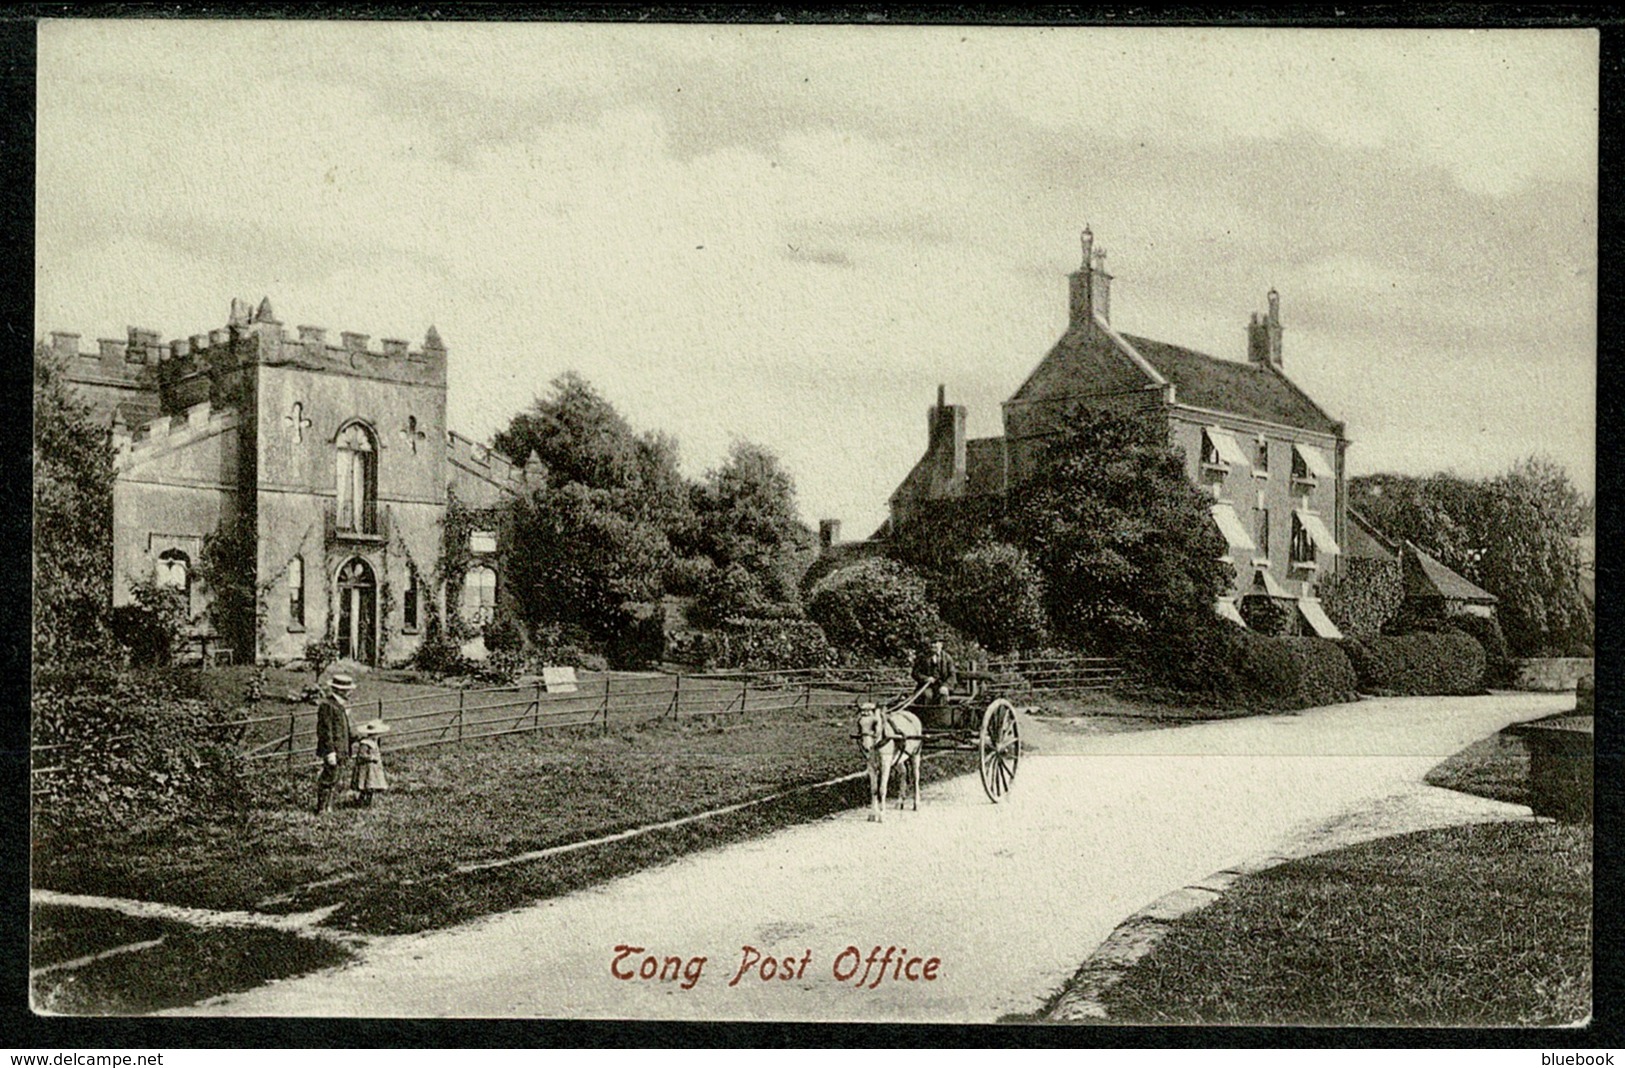 Ref 1250 - Early Postcard - Tong Post Office - Shropshire Salop - Shropshire